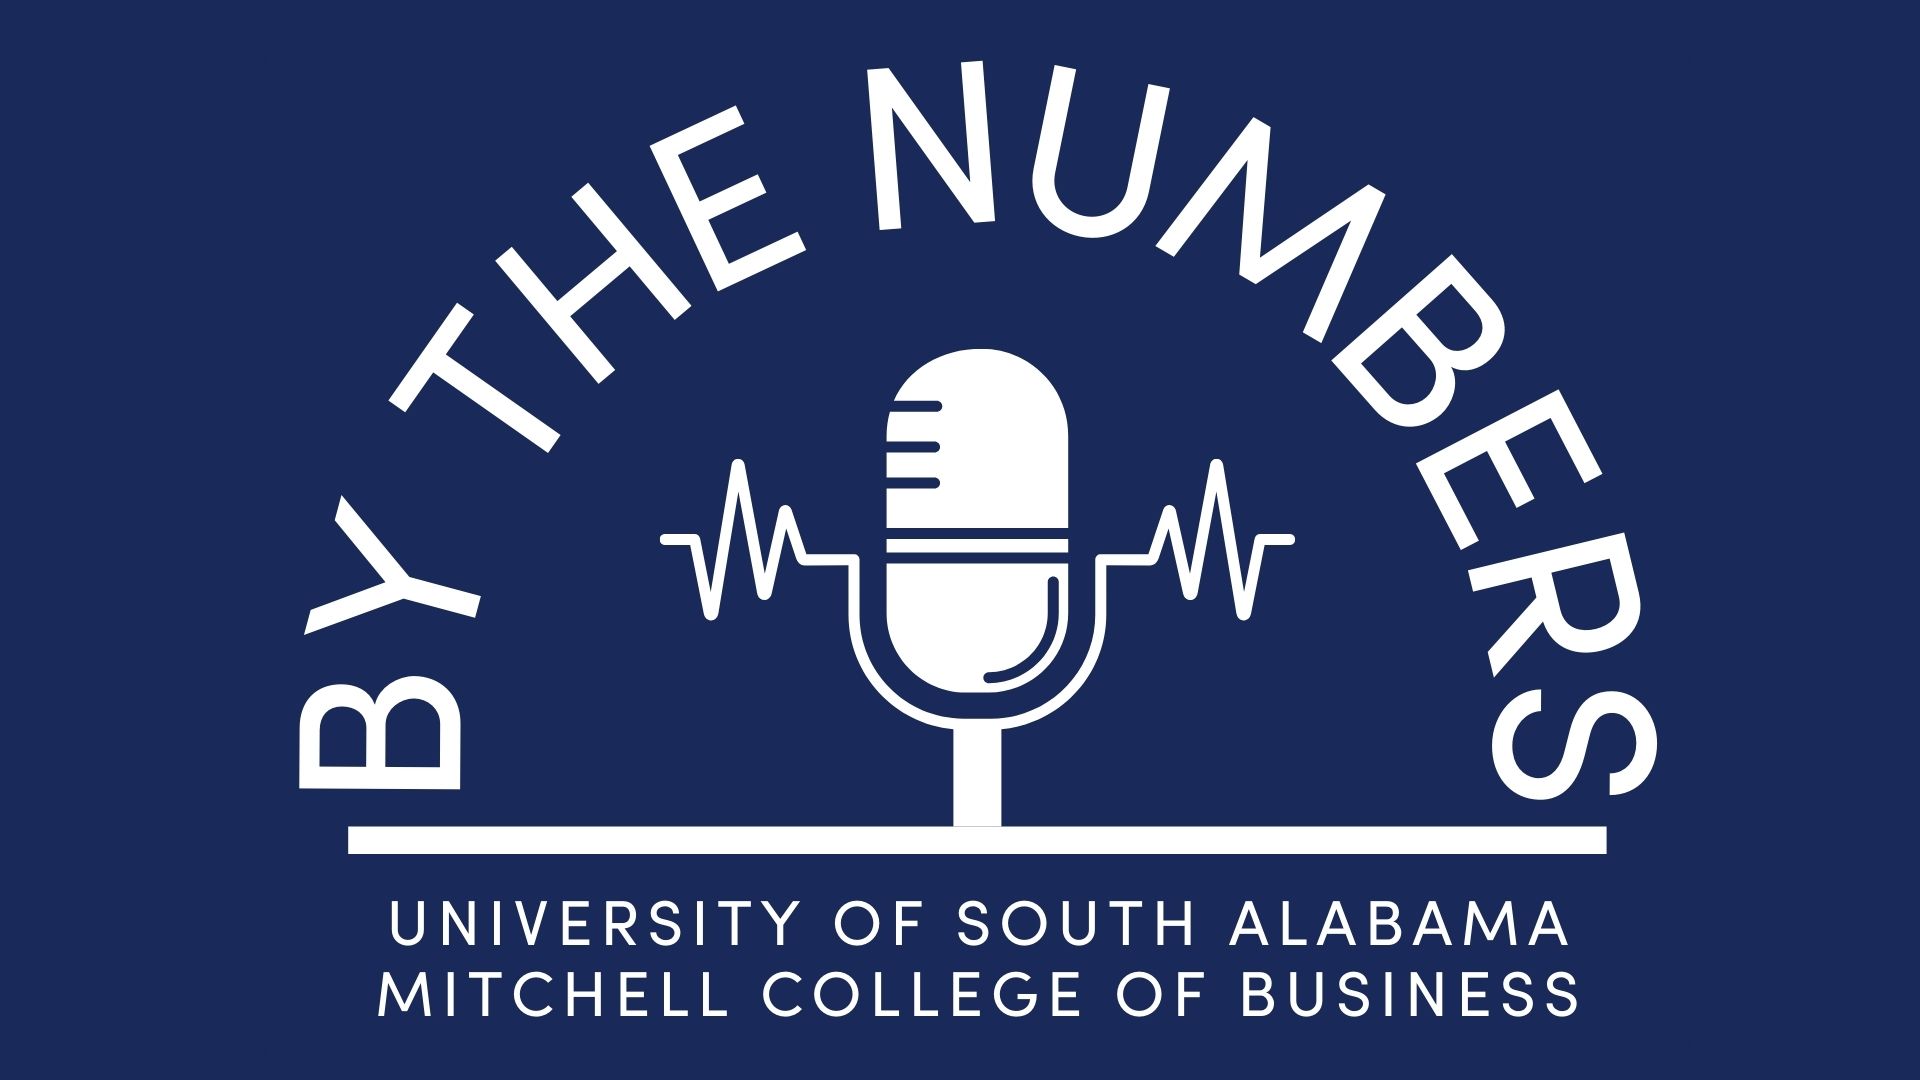 By the Numbers University of South Alabaama Mitchell College of Business